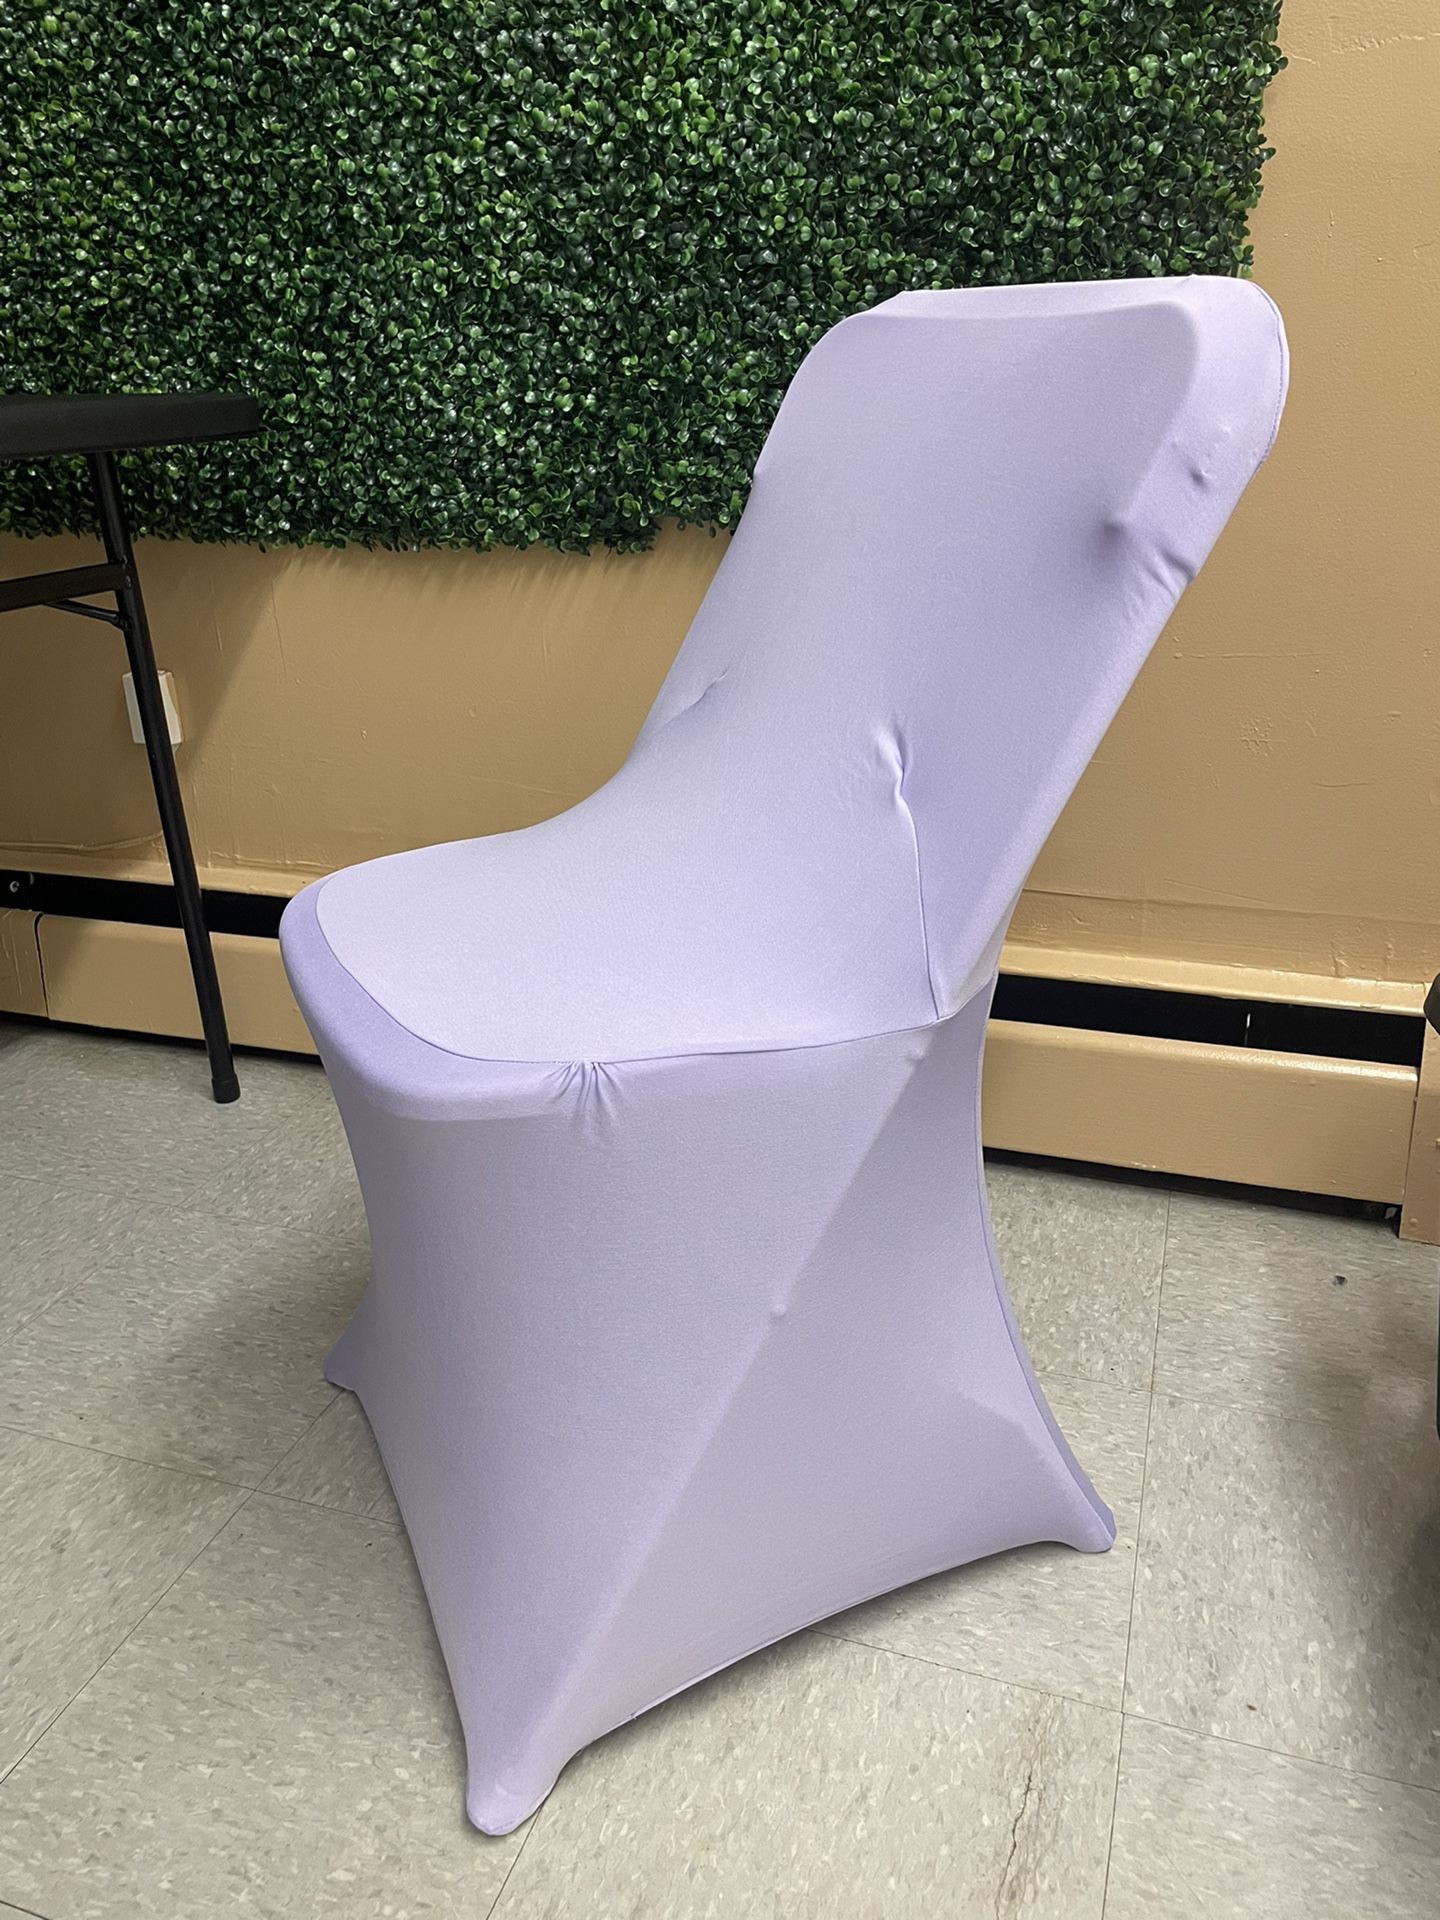 Lavender Folding chair Covers